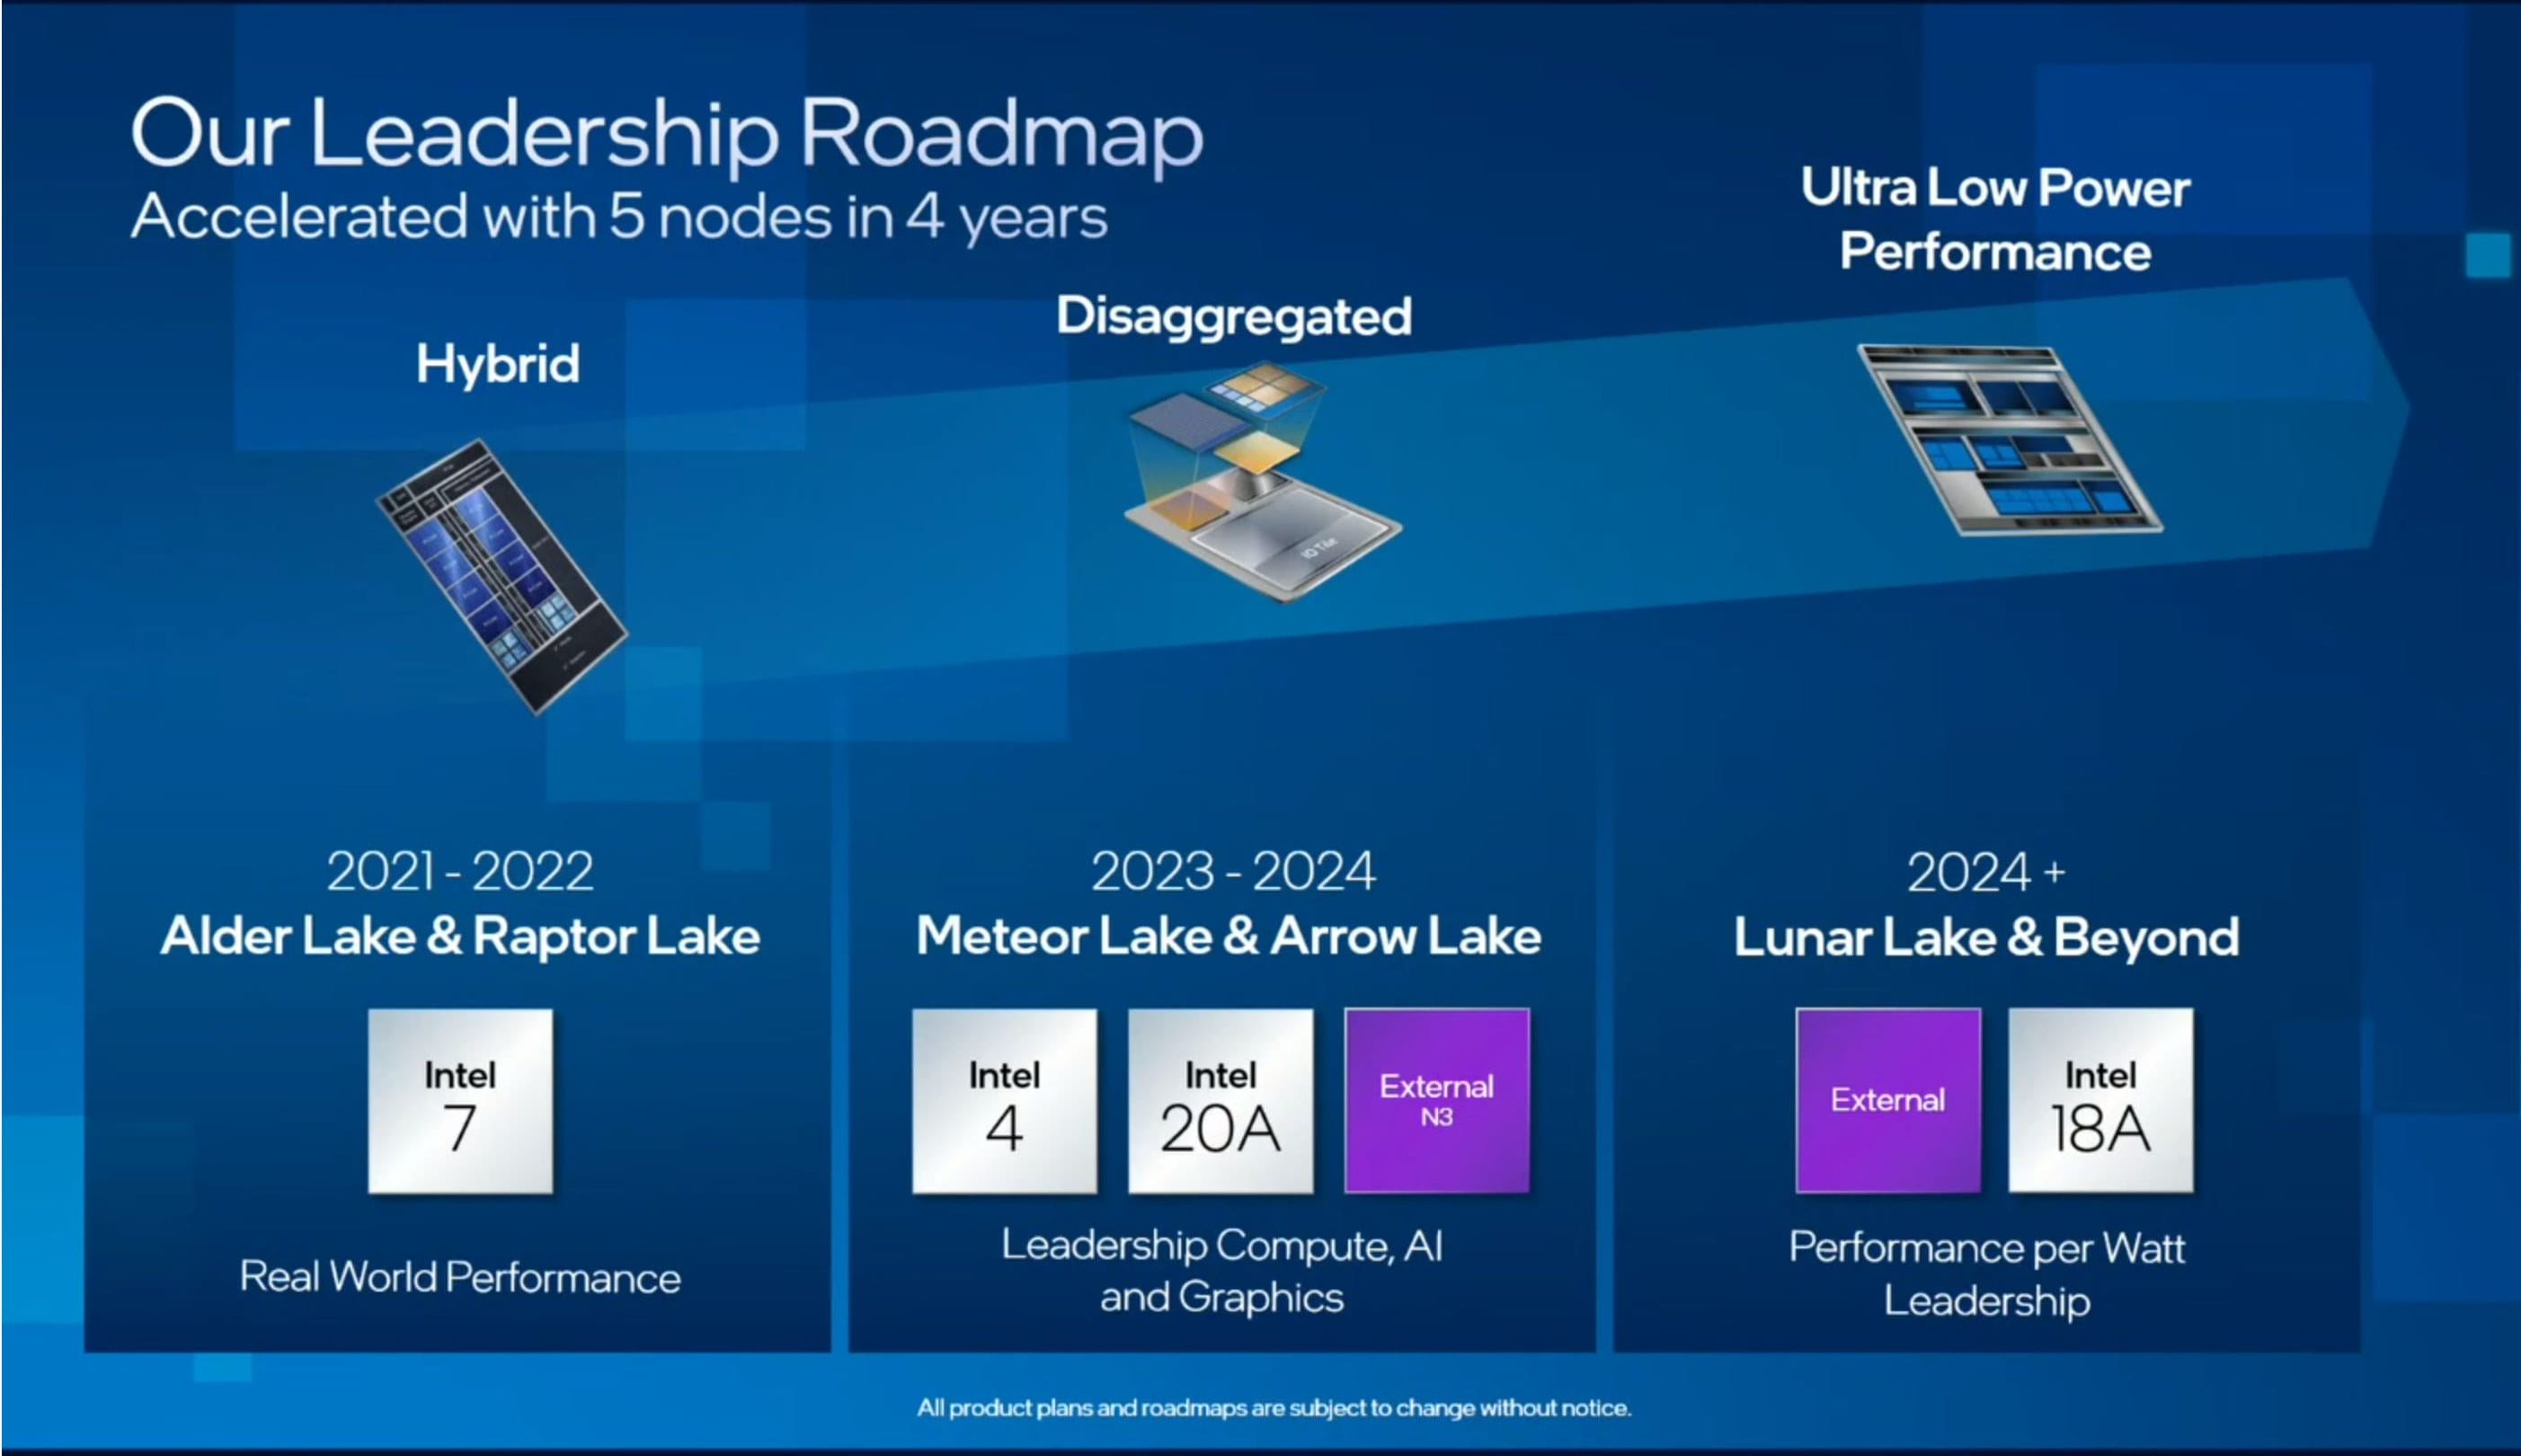 Intel Roadmap to 2024 and beyond